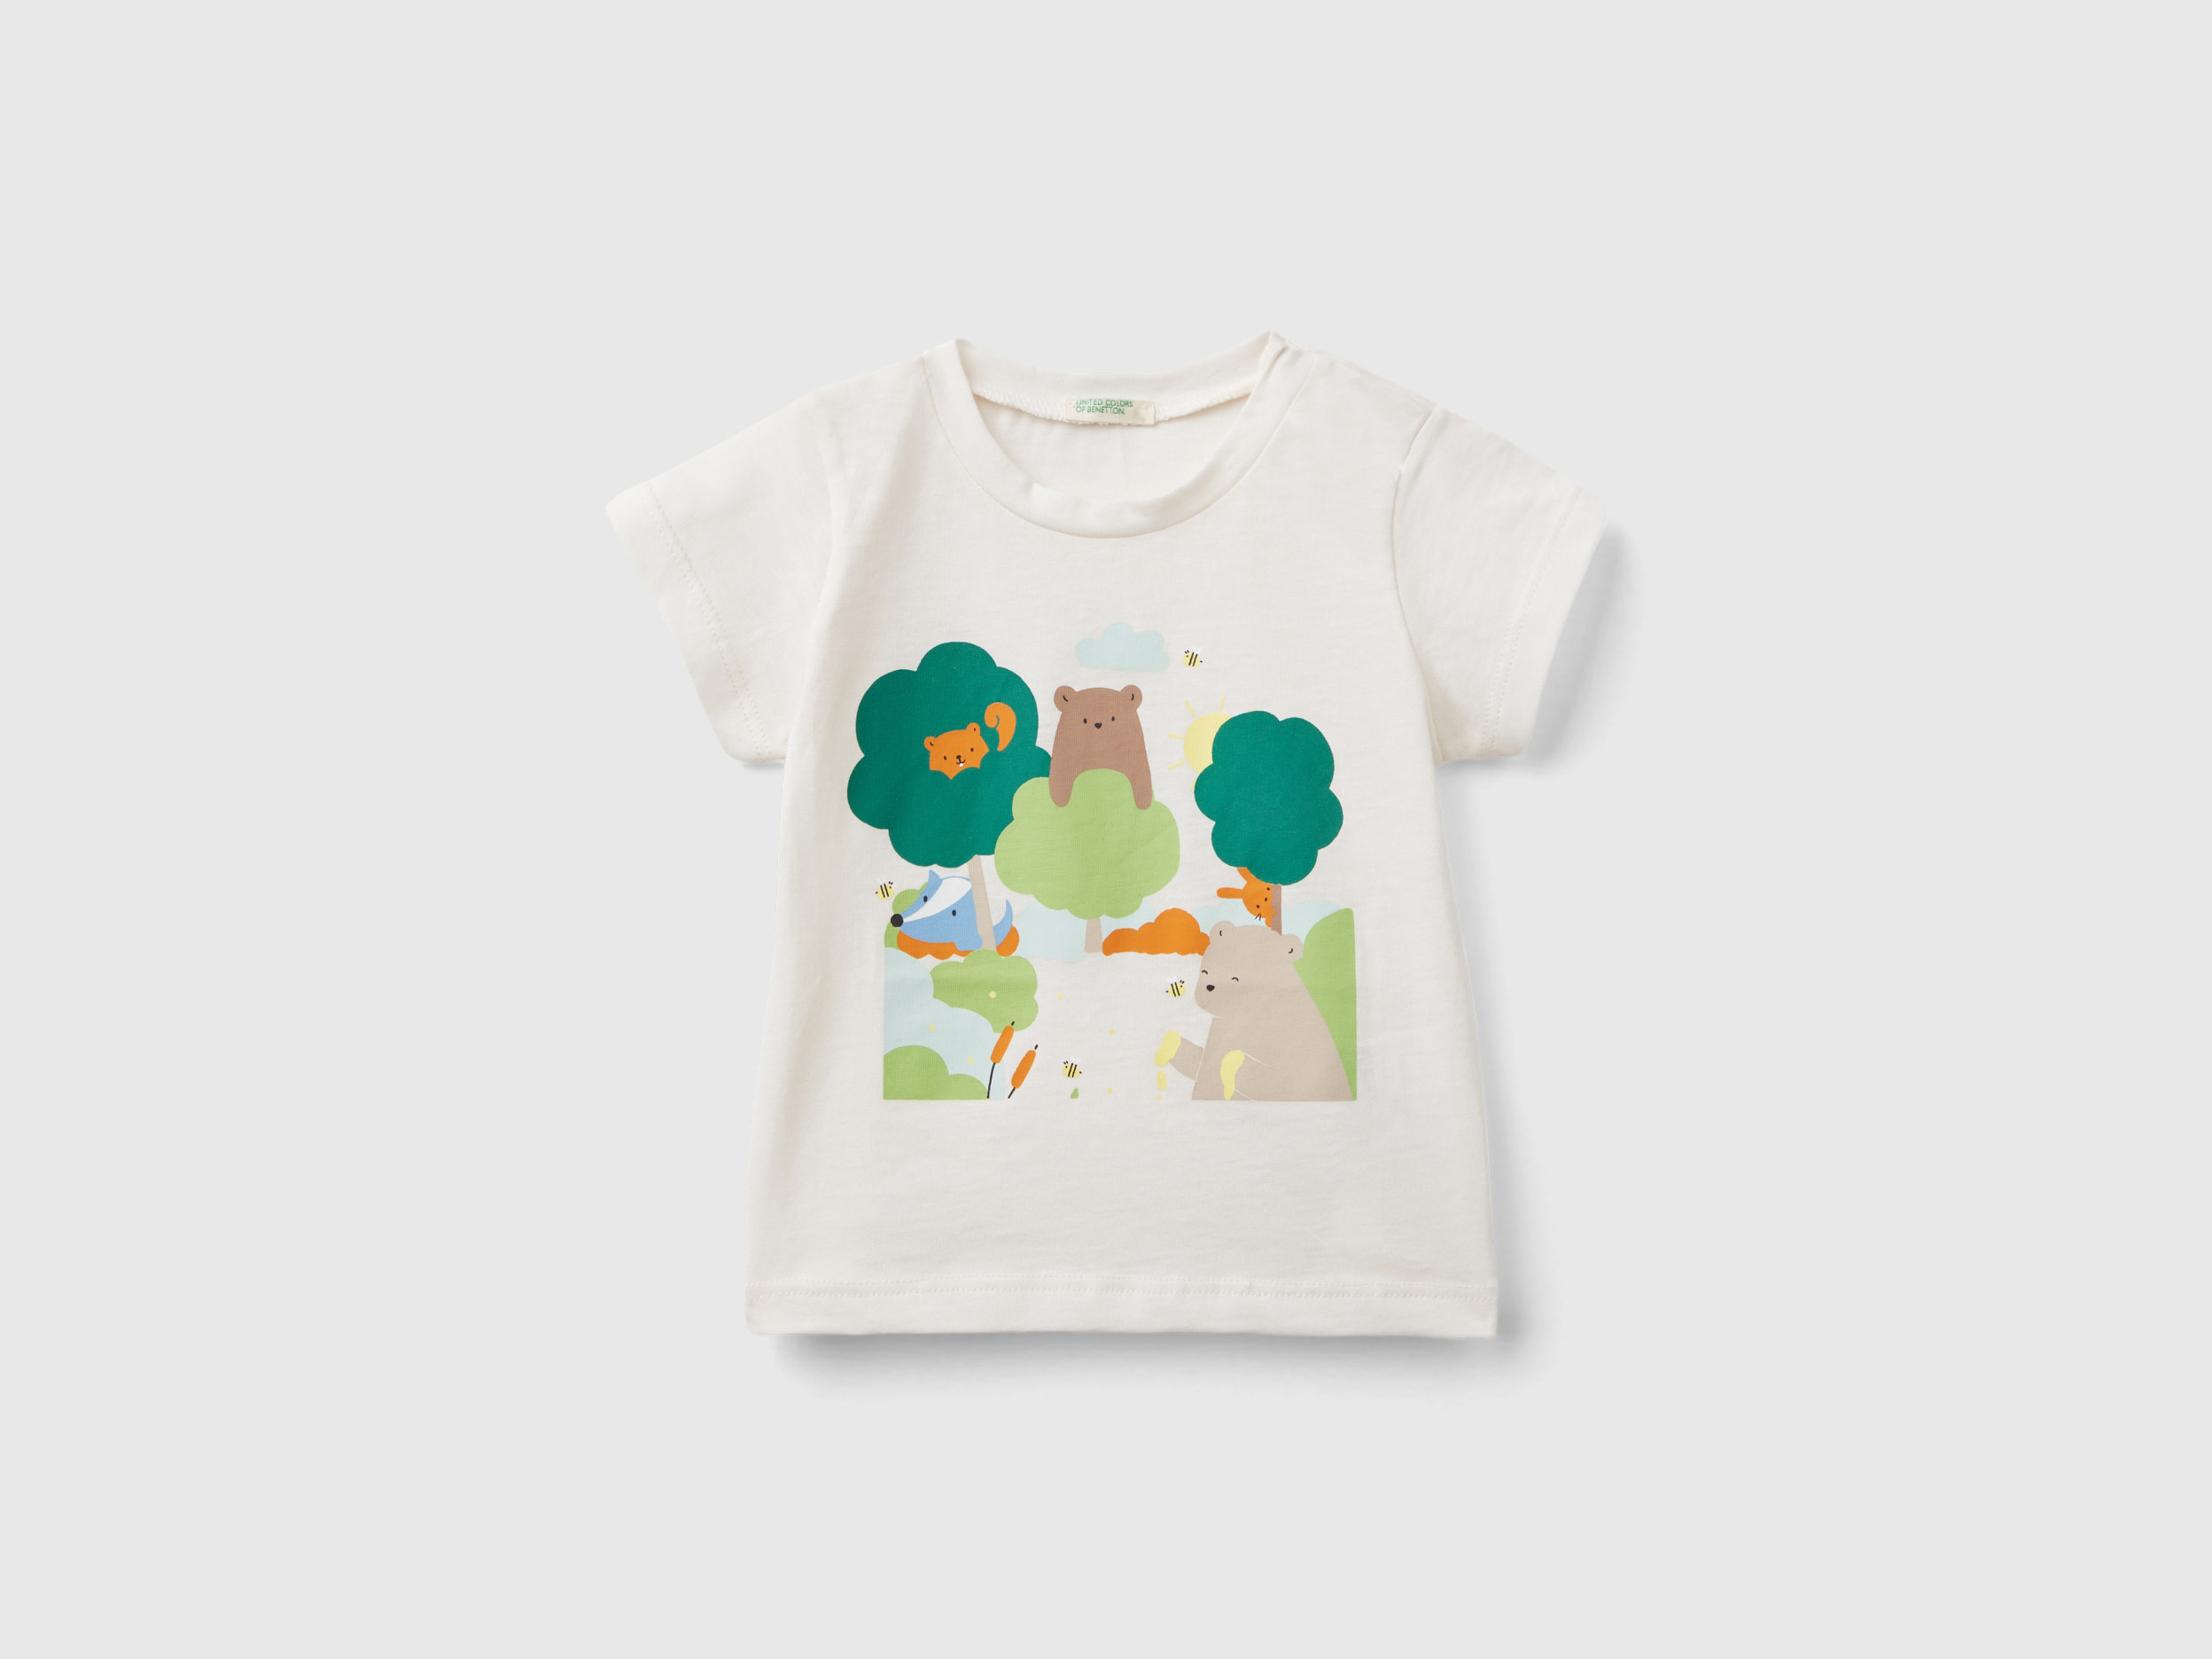 Benetton, T-shirt In Organic Cotton With Print, size 1-3, Creamy White, Kids